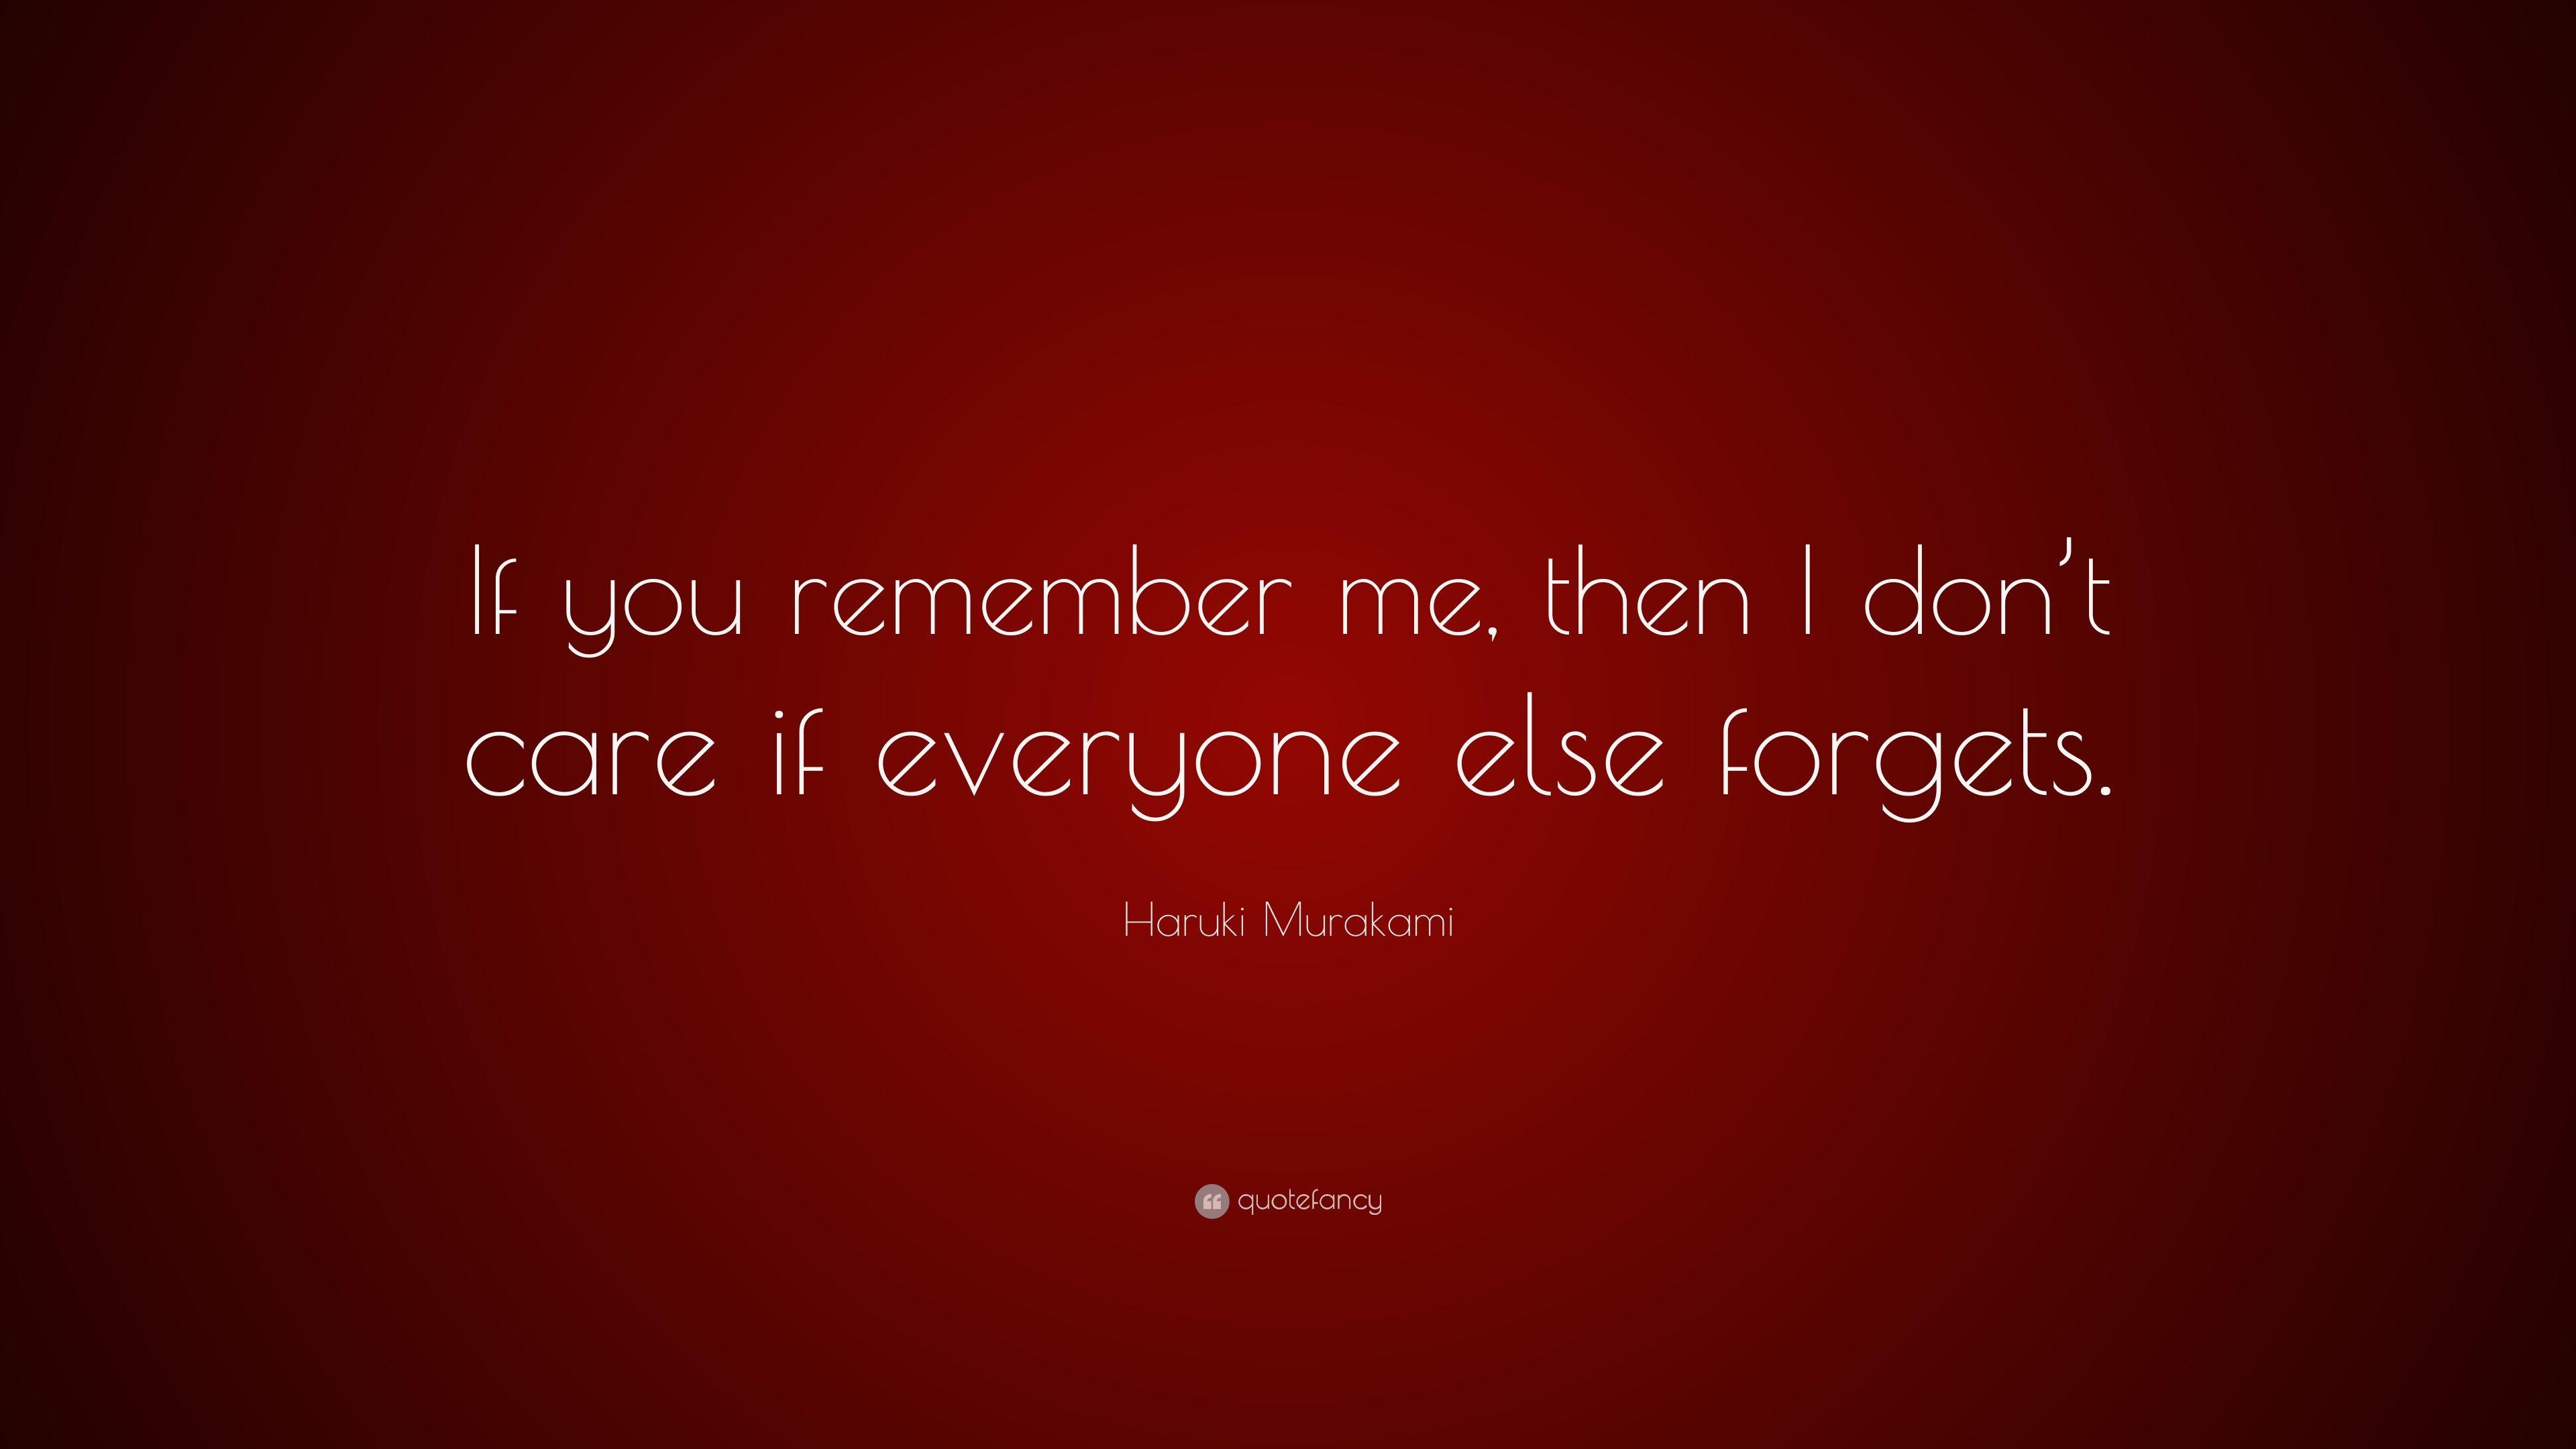 Haruki Murakami Quote: “If you remember me, then I don't care if